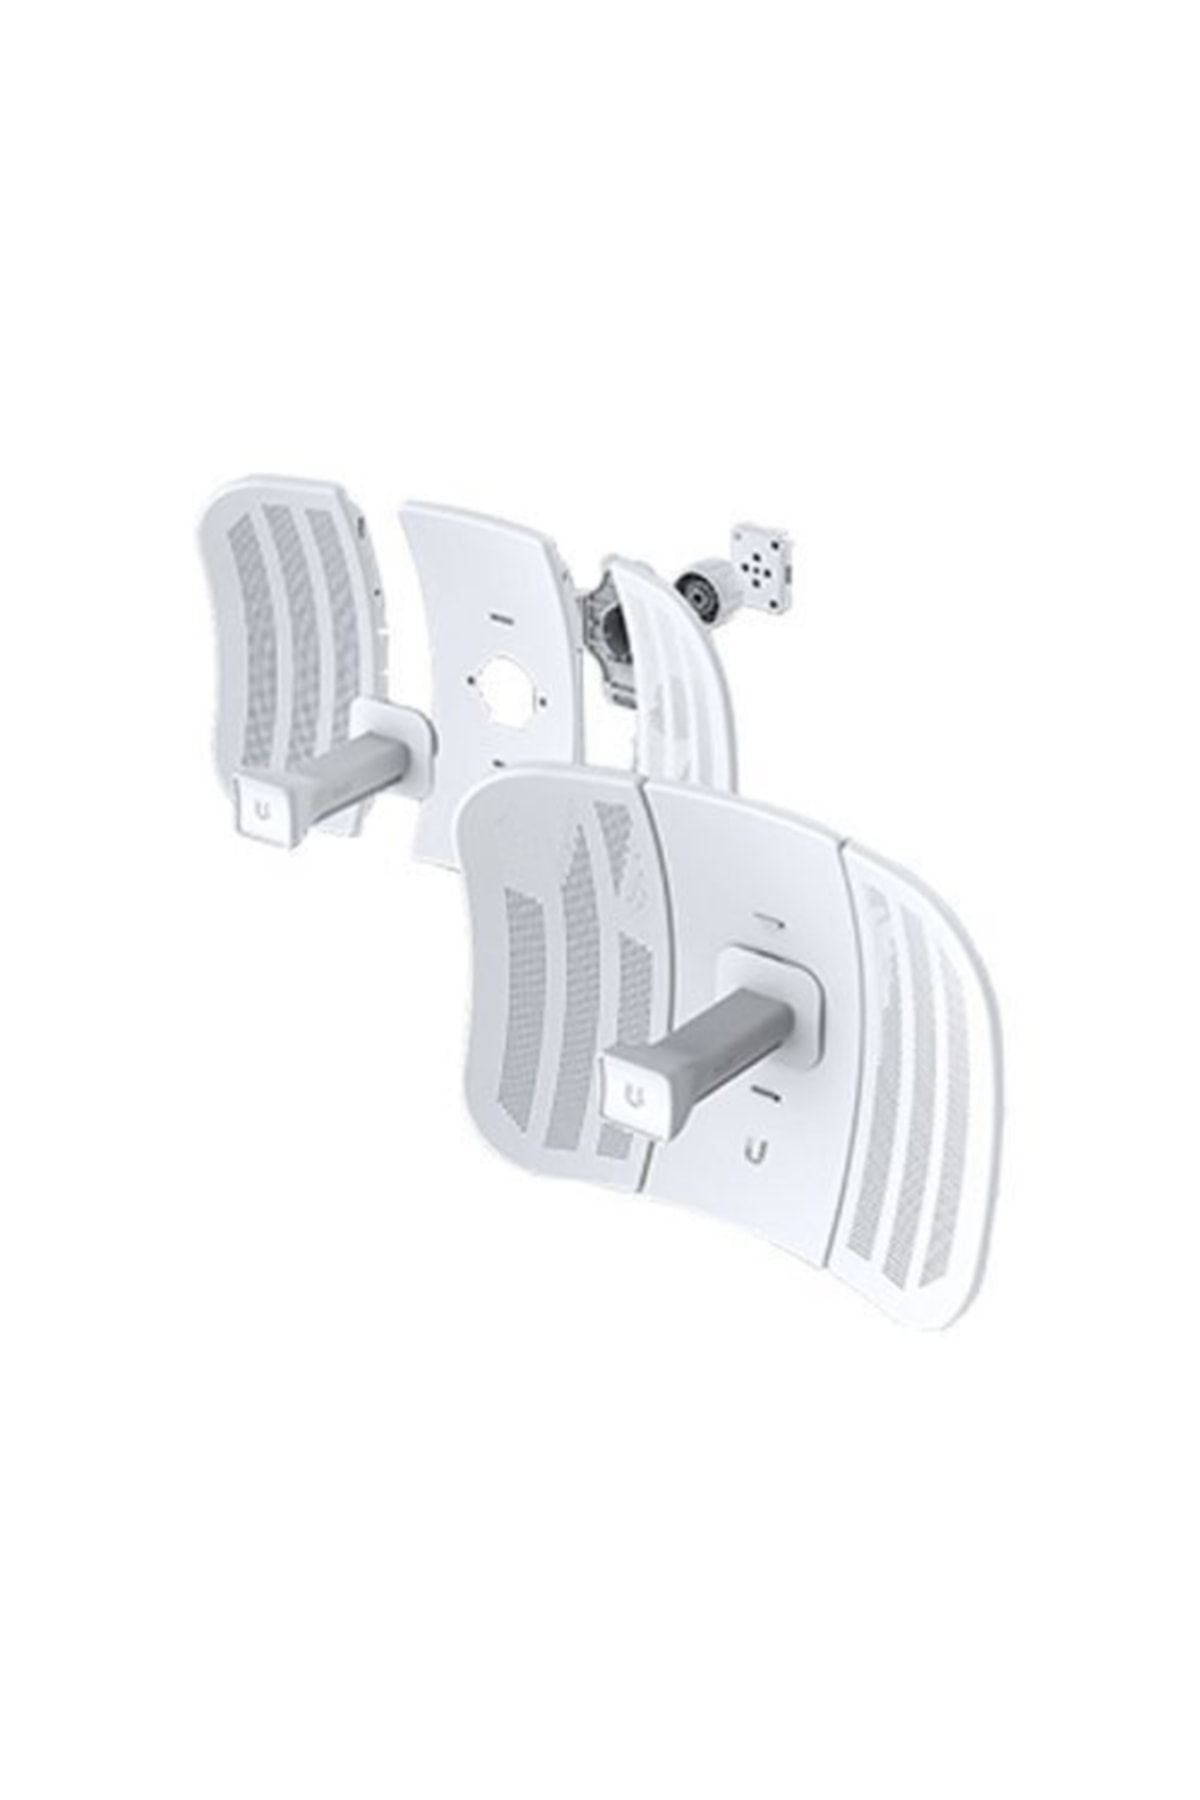 Genel Markalar UBIQUITI (UBNT) Lite Beam M5 CPE-LBE-M5-23 23dBi Outdoor Directional Patch 5 GhZ Anten